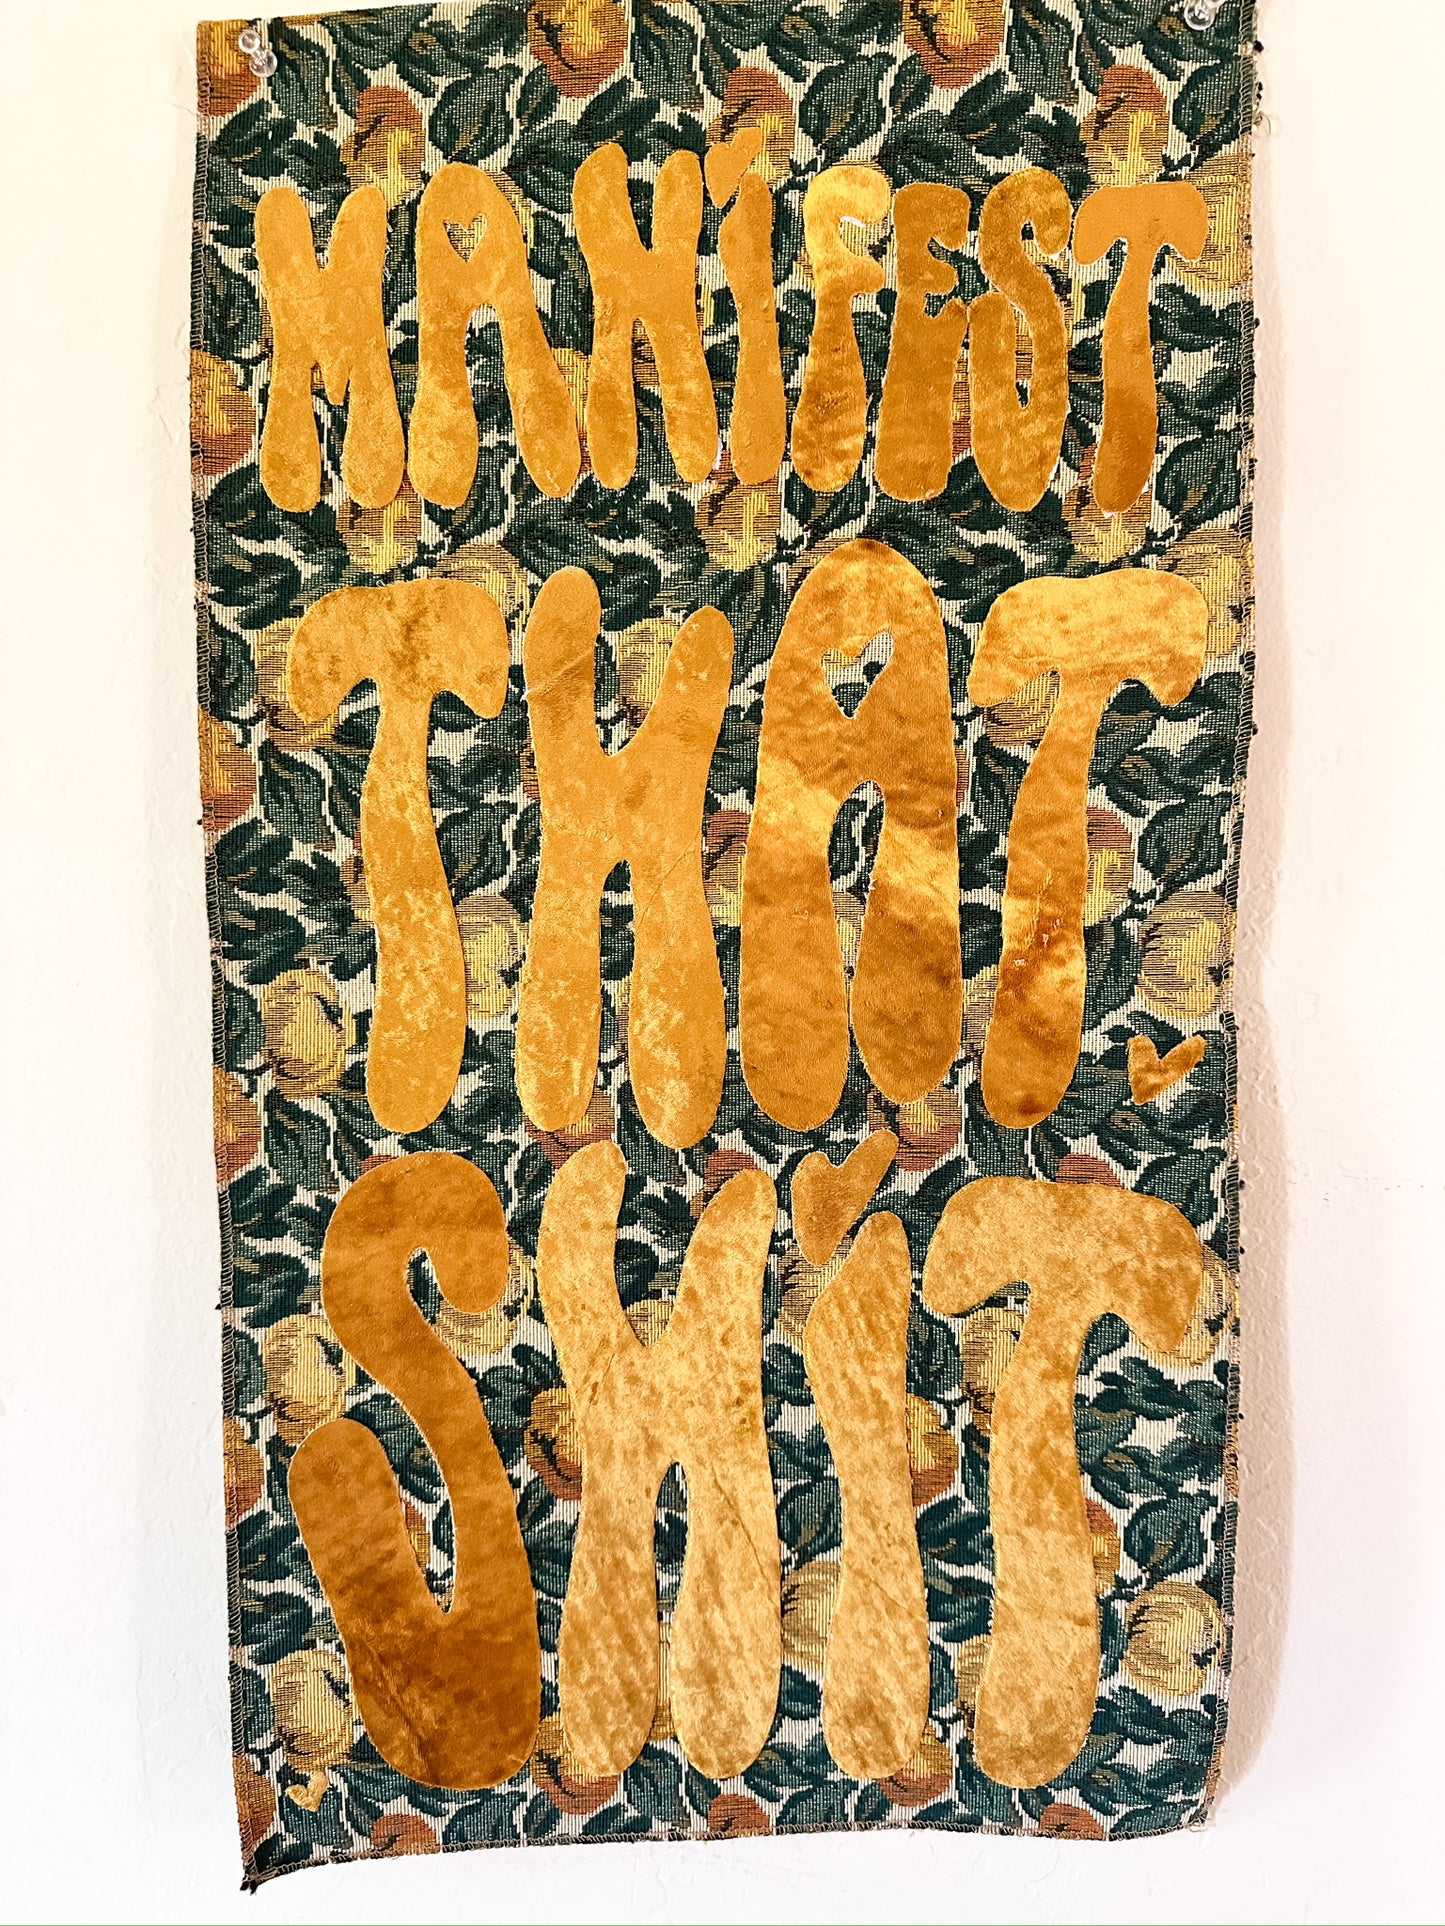 Manifest that Sh*t Wall Hanging